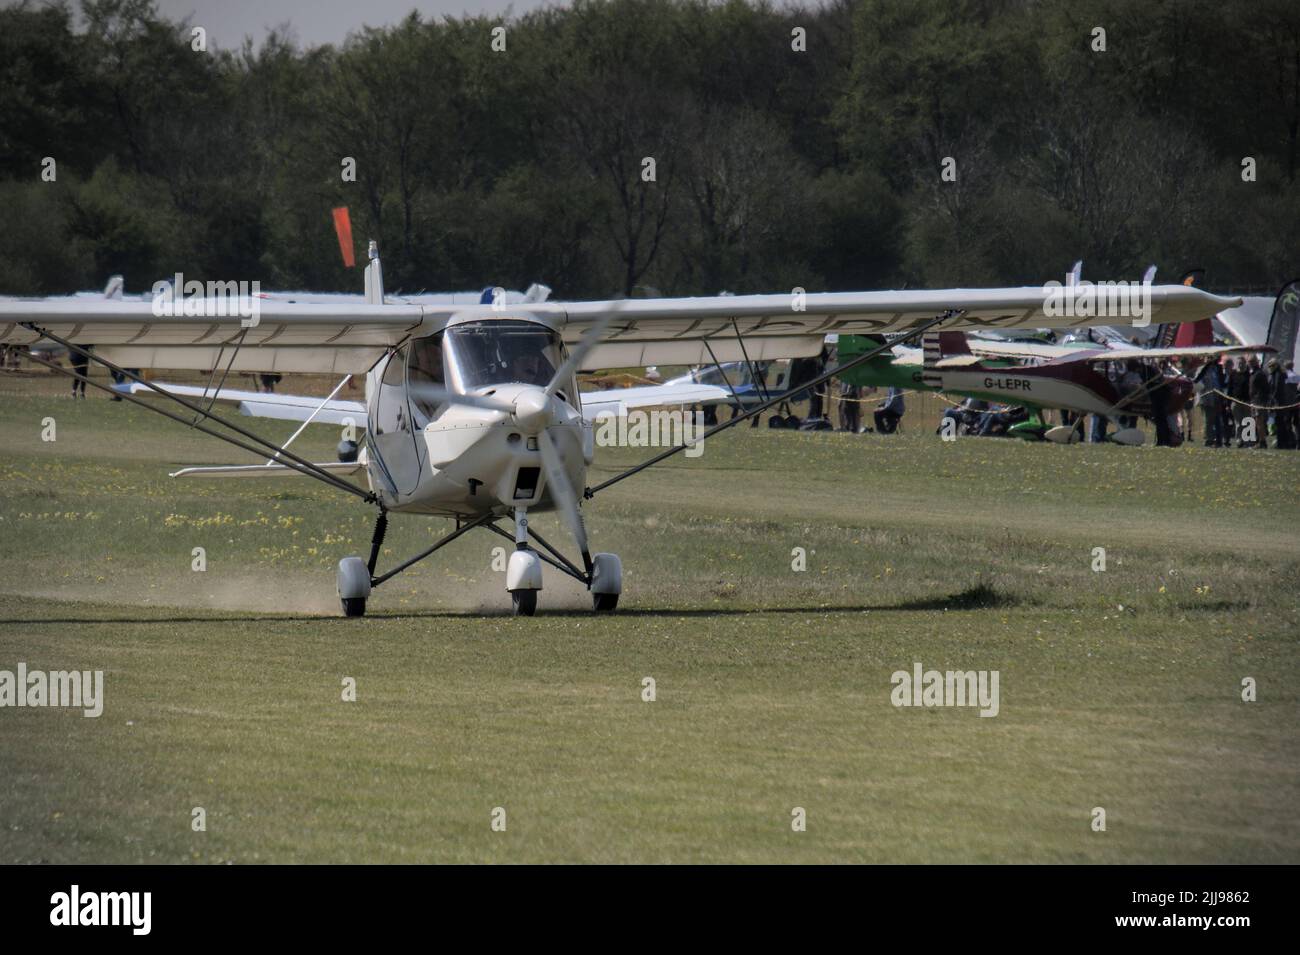 An Ikarus C42 light aircraft at Popham Airfield in Hampshire for the Microlight Trade Fair 2022 Stock Photo